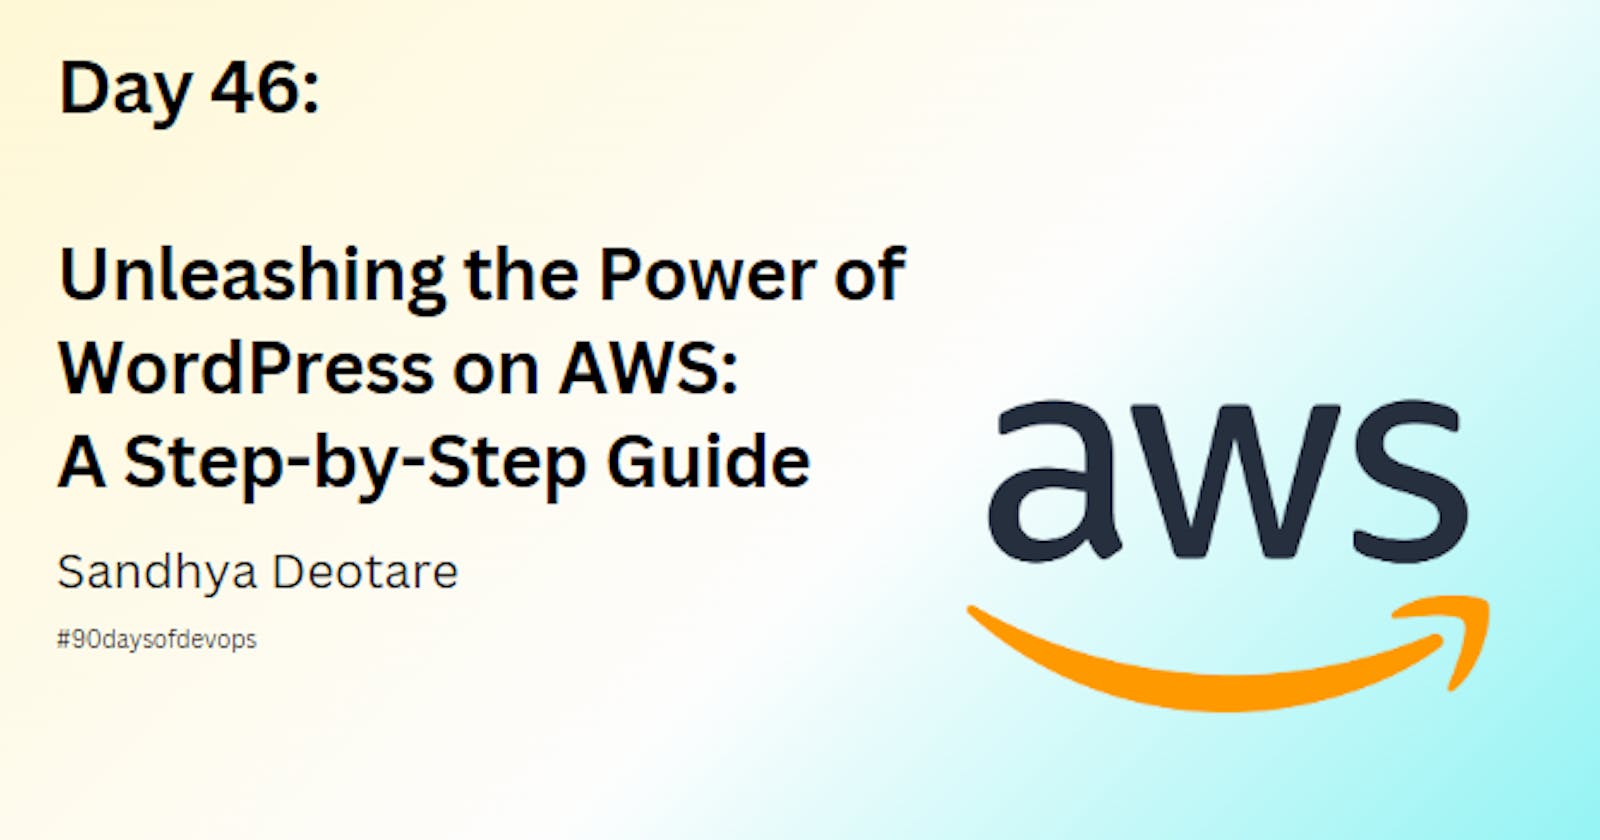 Unleashing the Power of WordPress on AWS: A Step-by-Step Guide